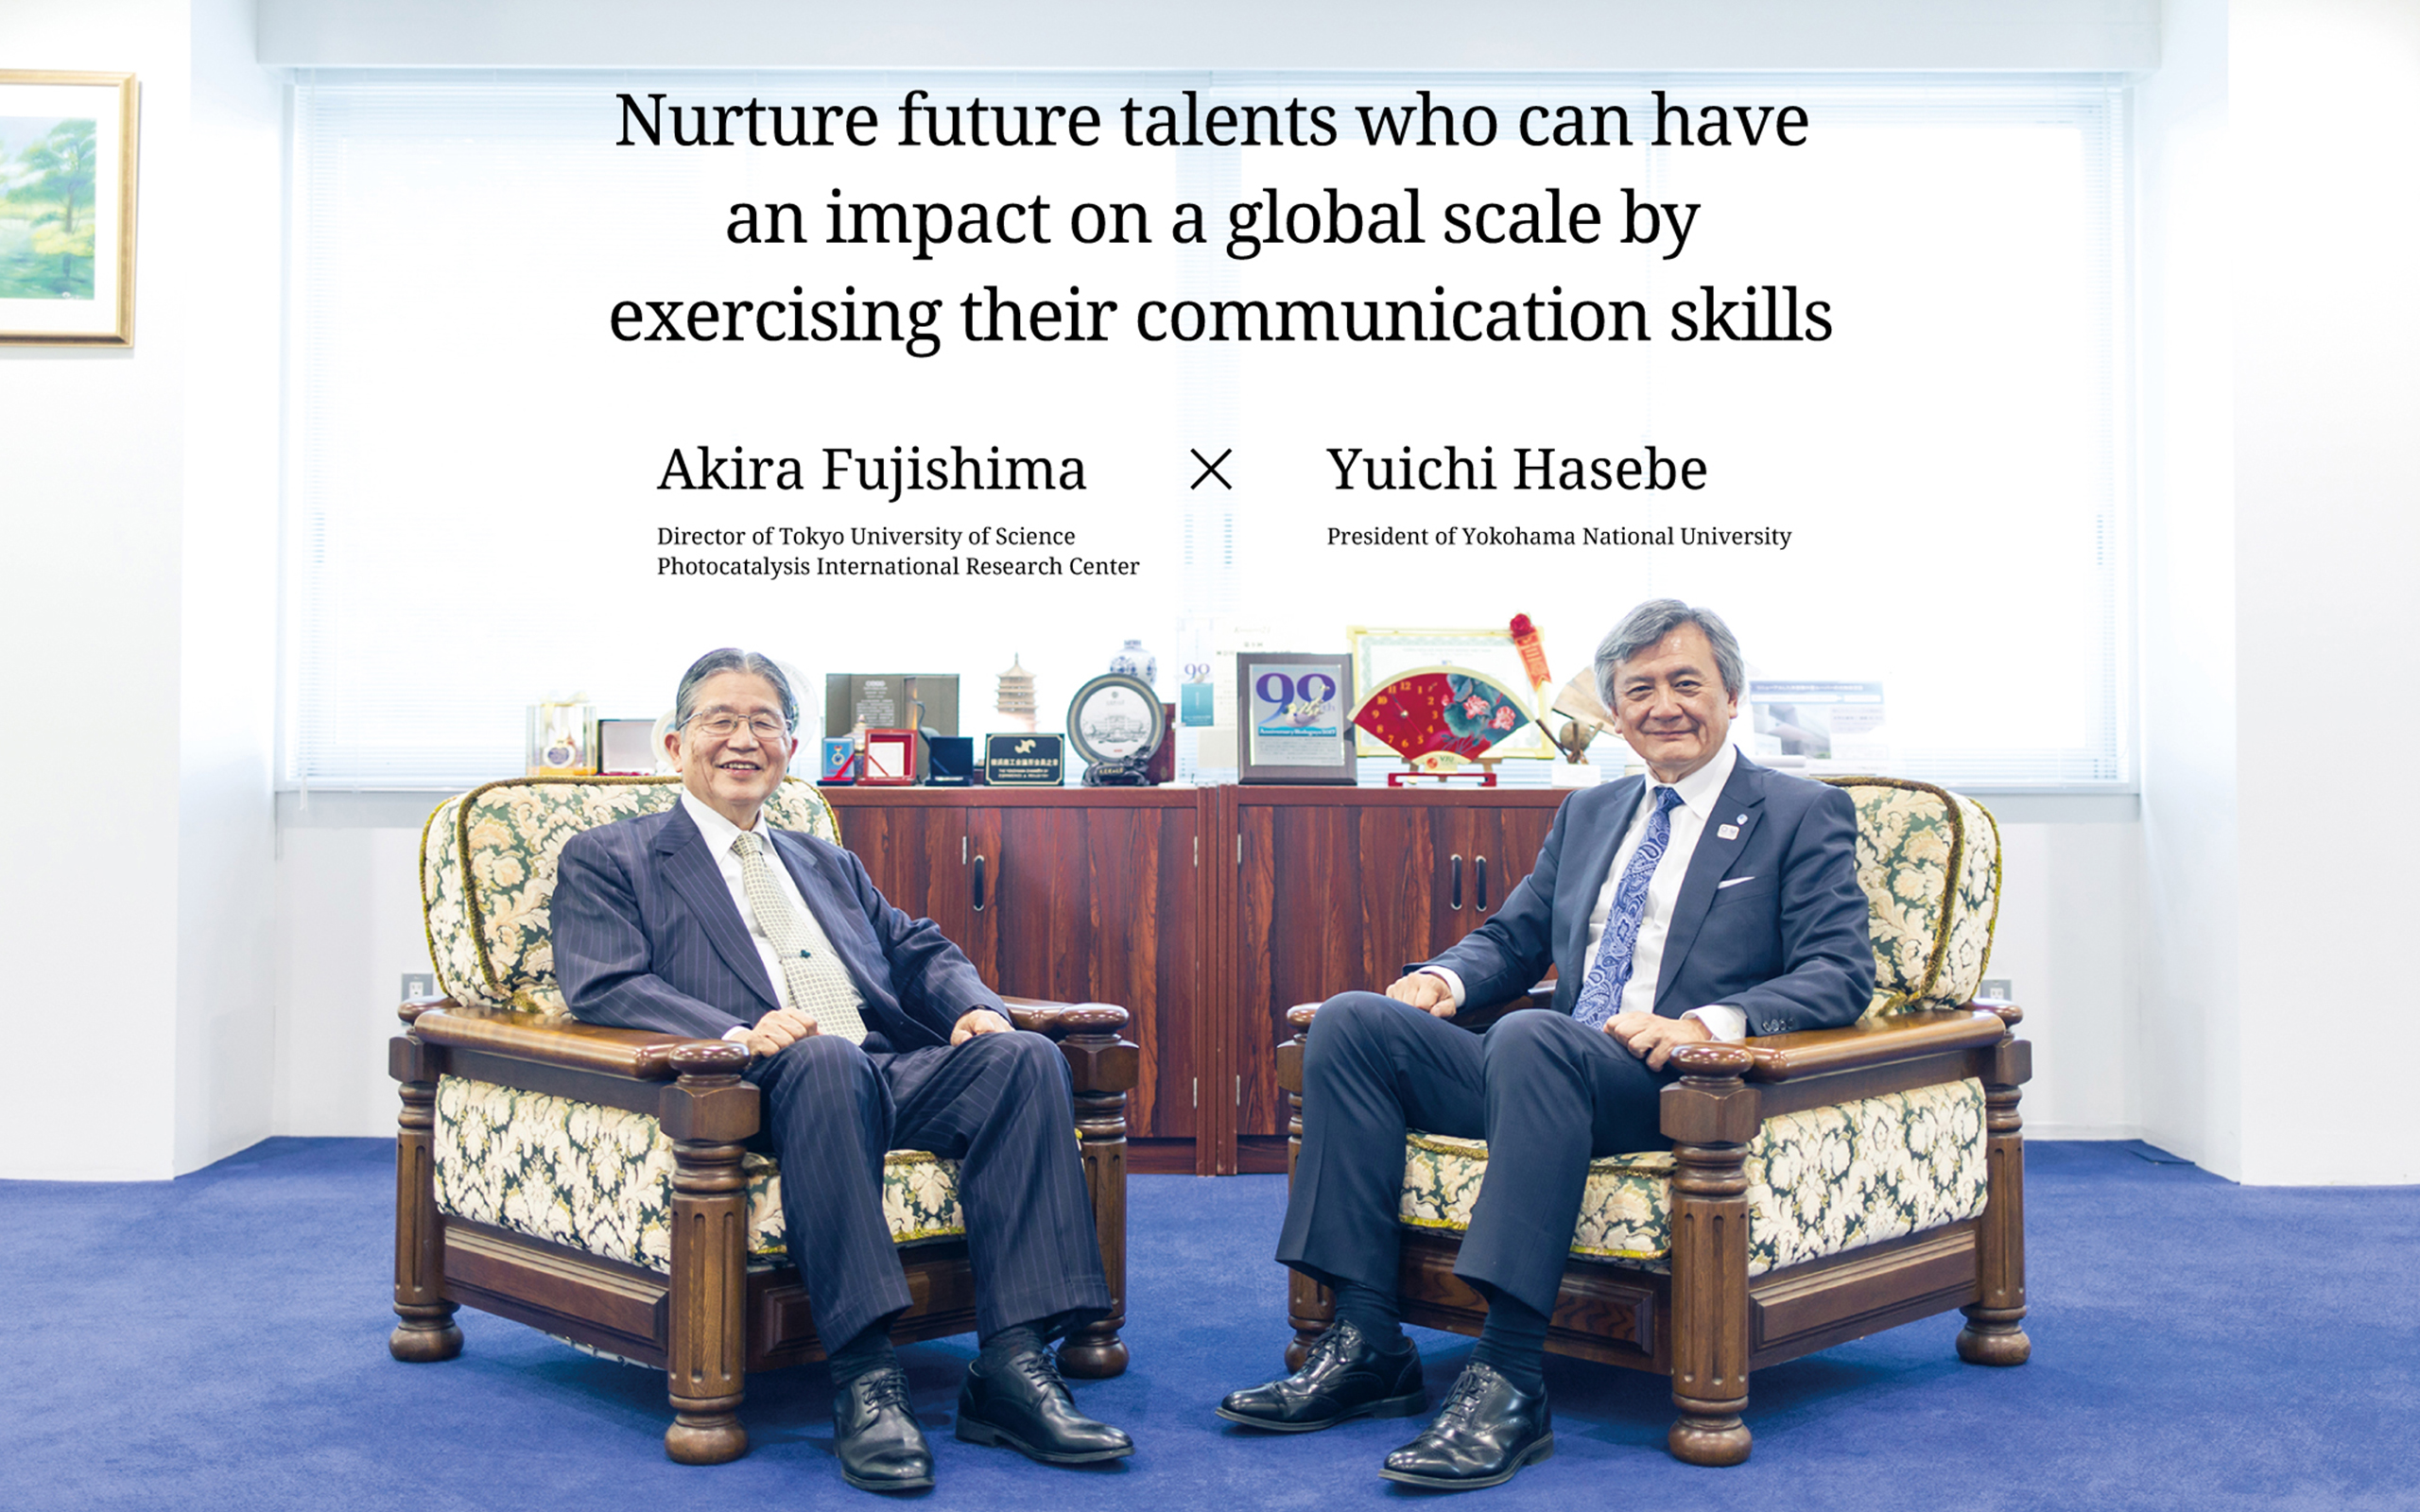 Nurture future talents who can have an impact on a global scale by exercising their communication skills